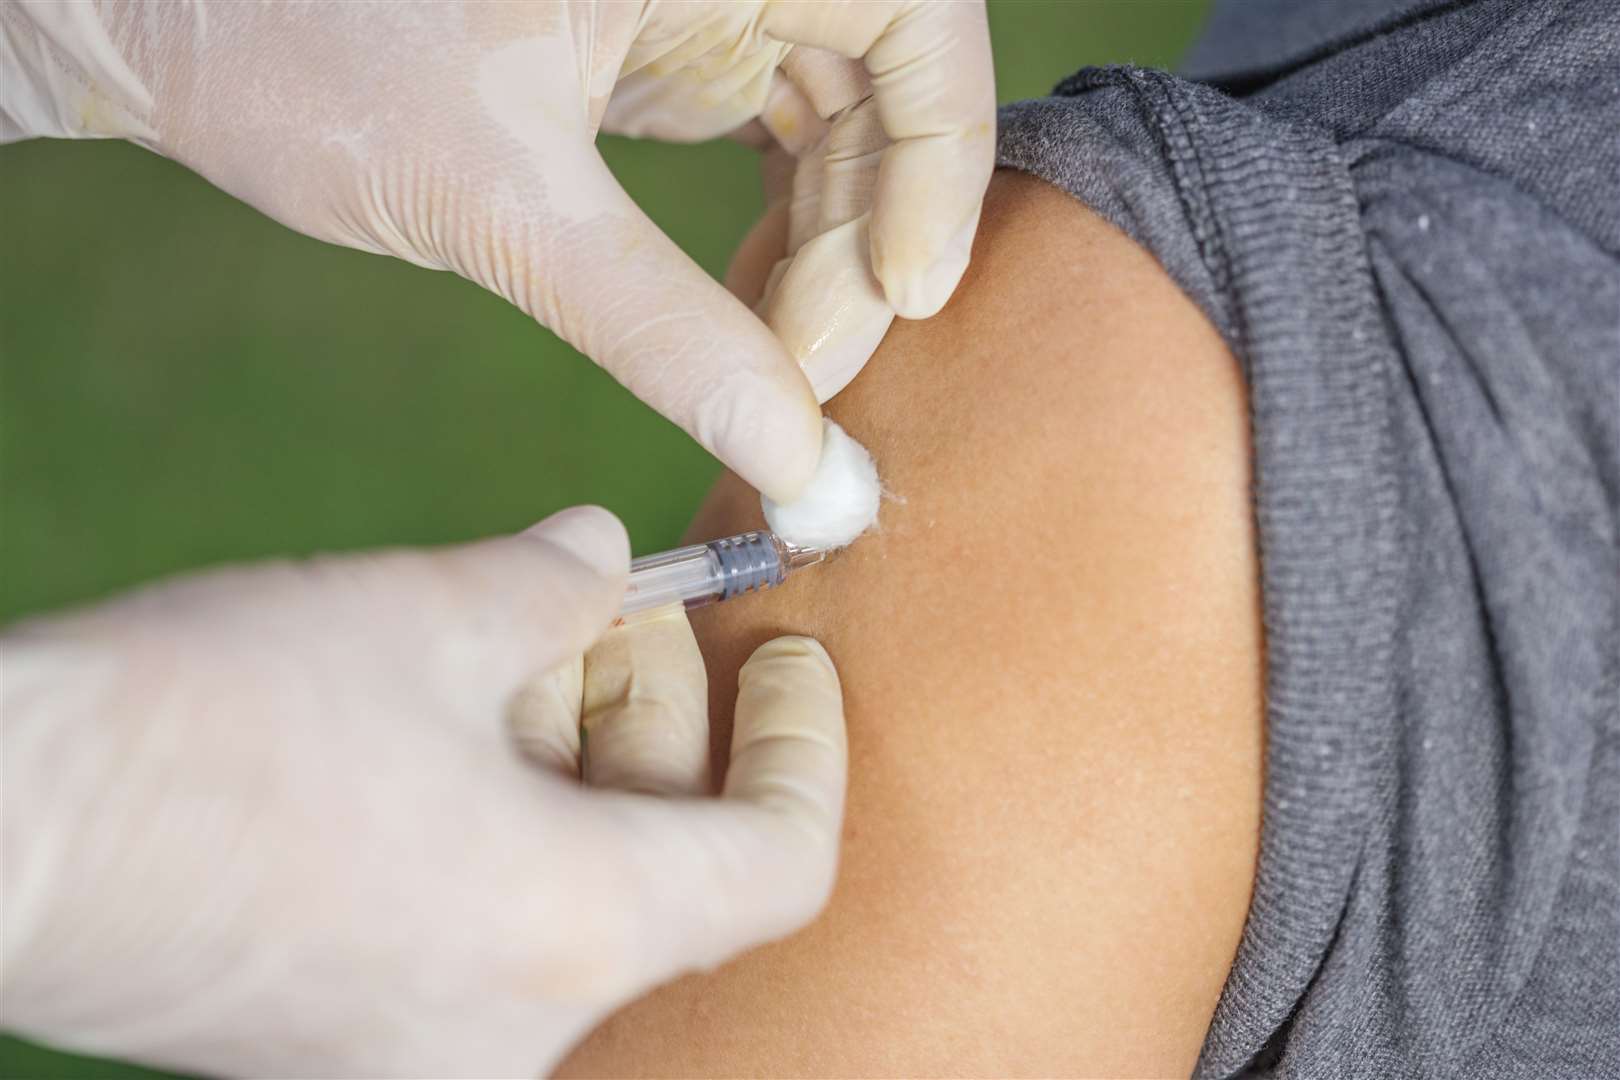 A patient is given the vaccine.